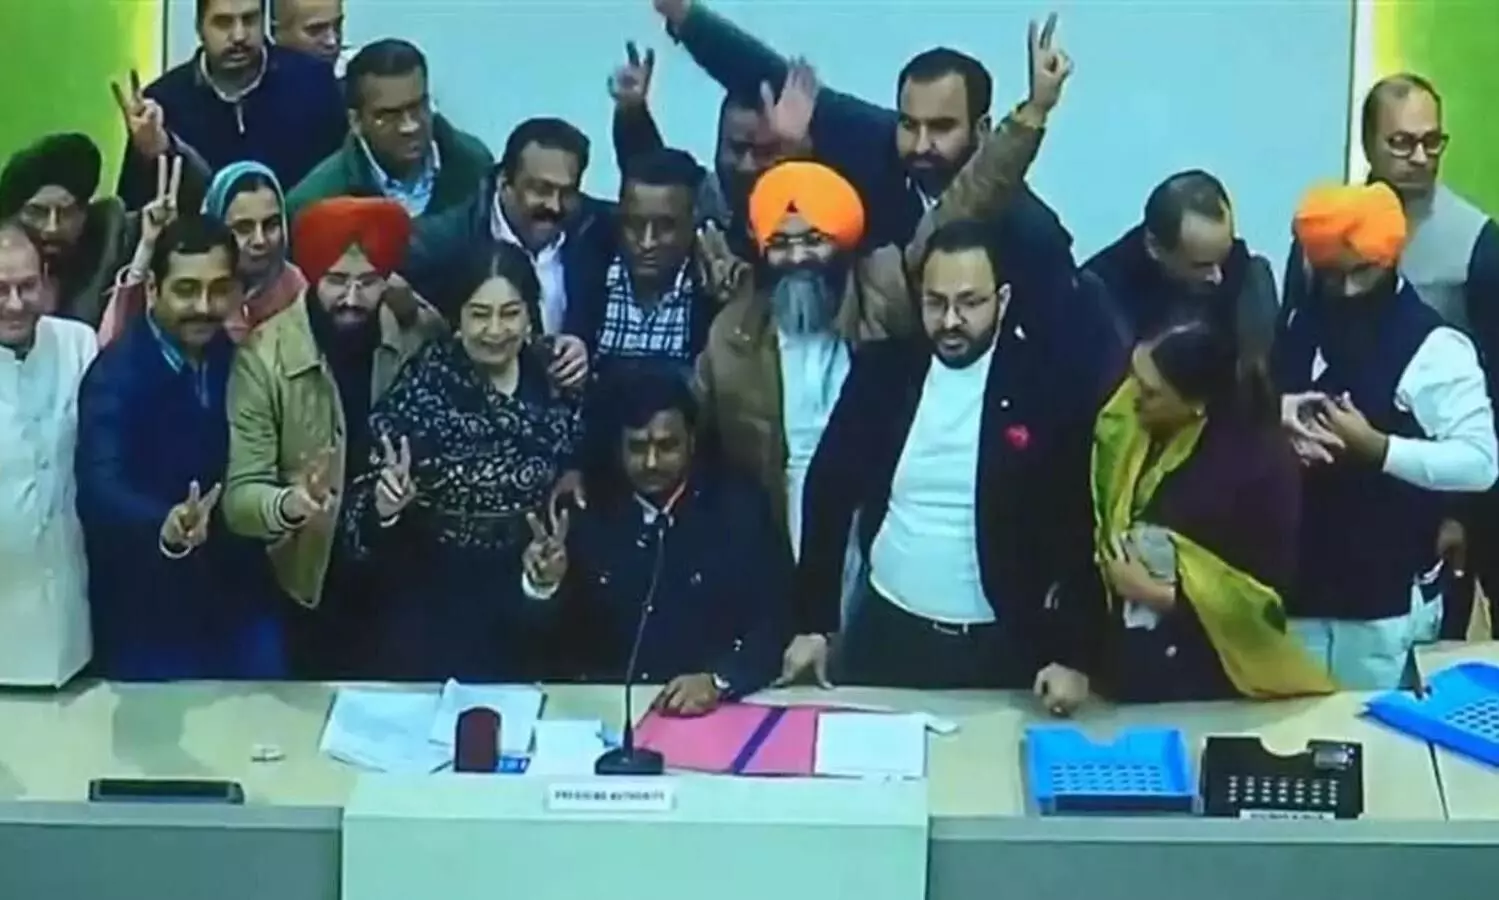 Chandigarh mayoral poll row: AAP-Congress joint candidate petitions SC